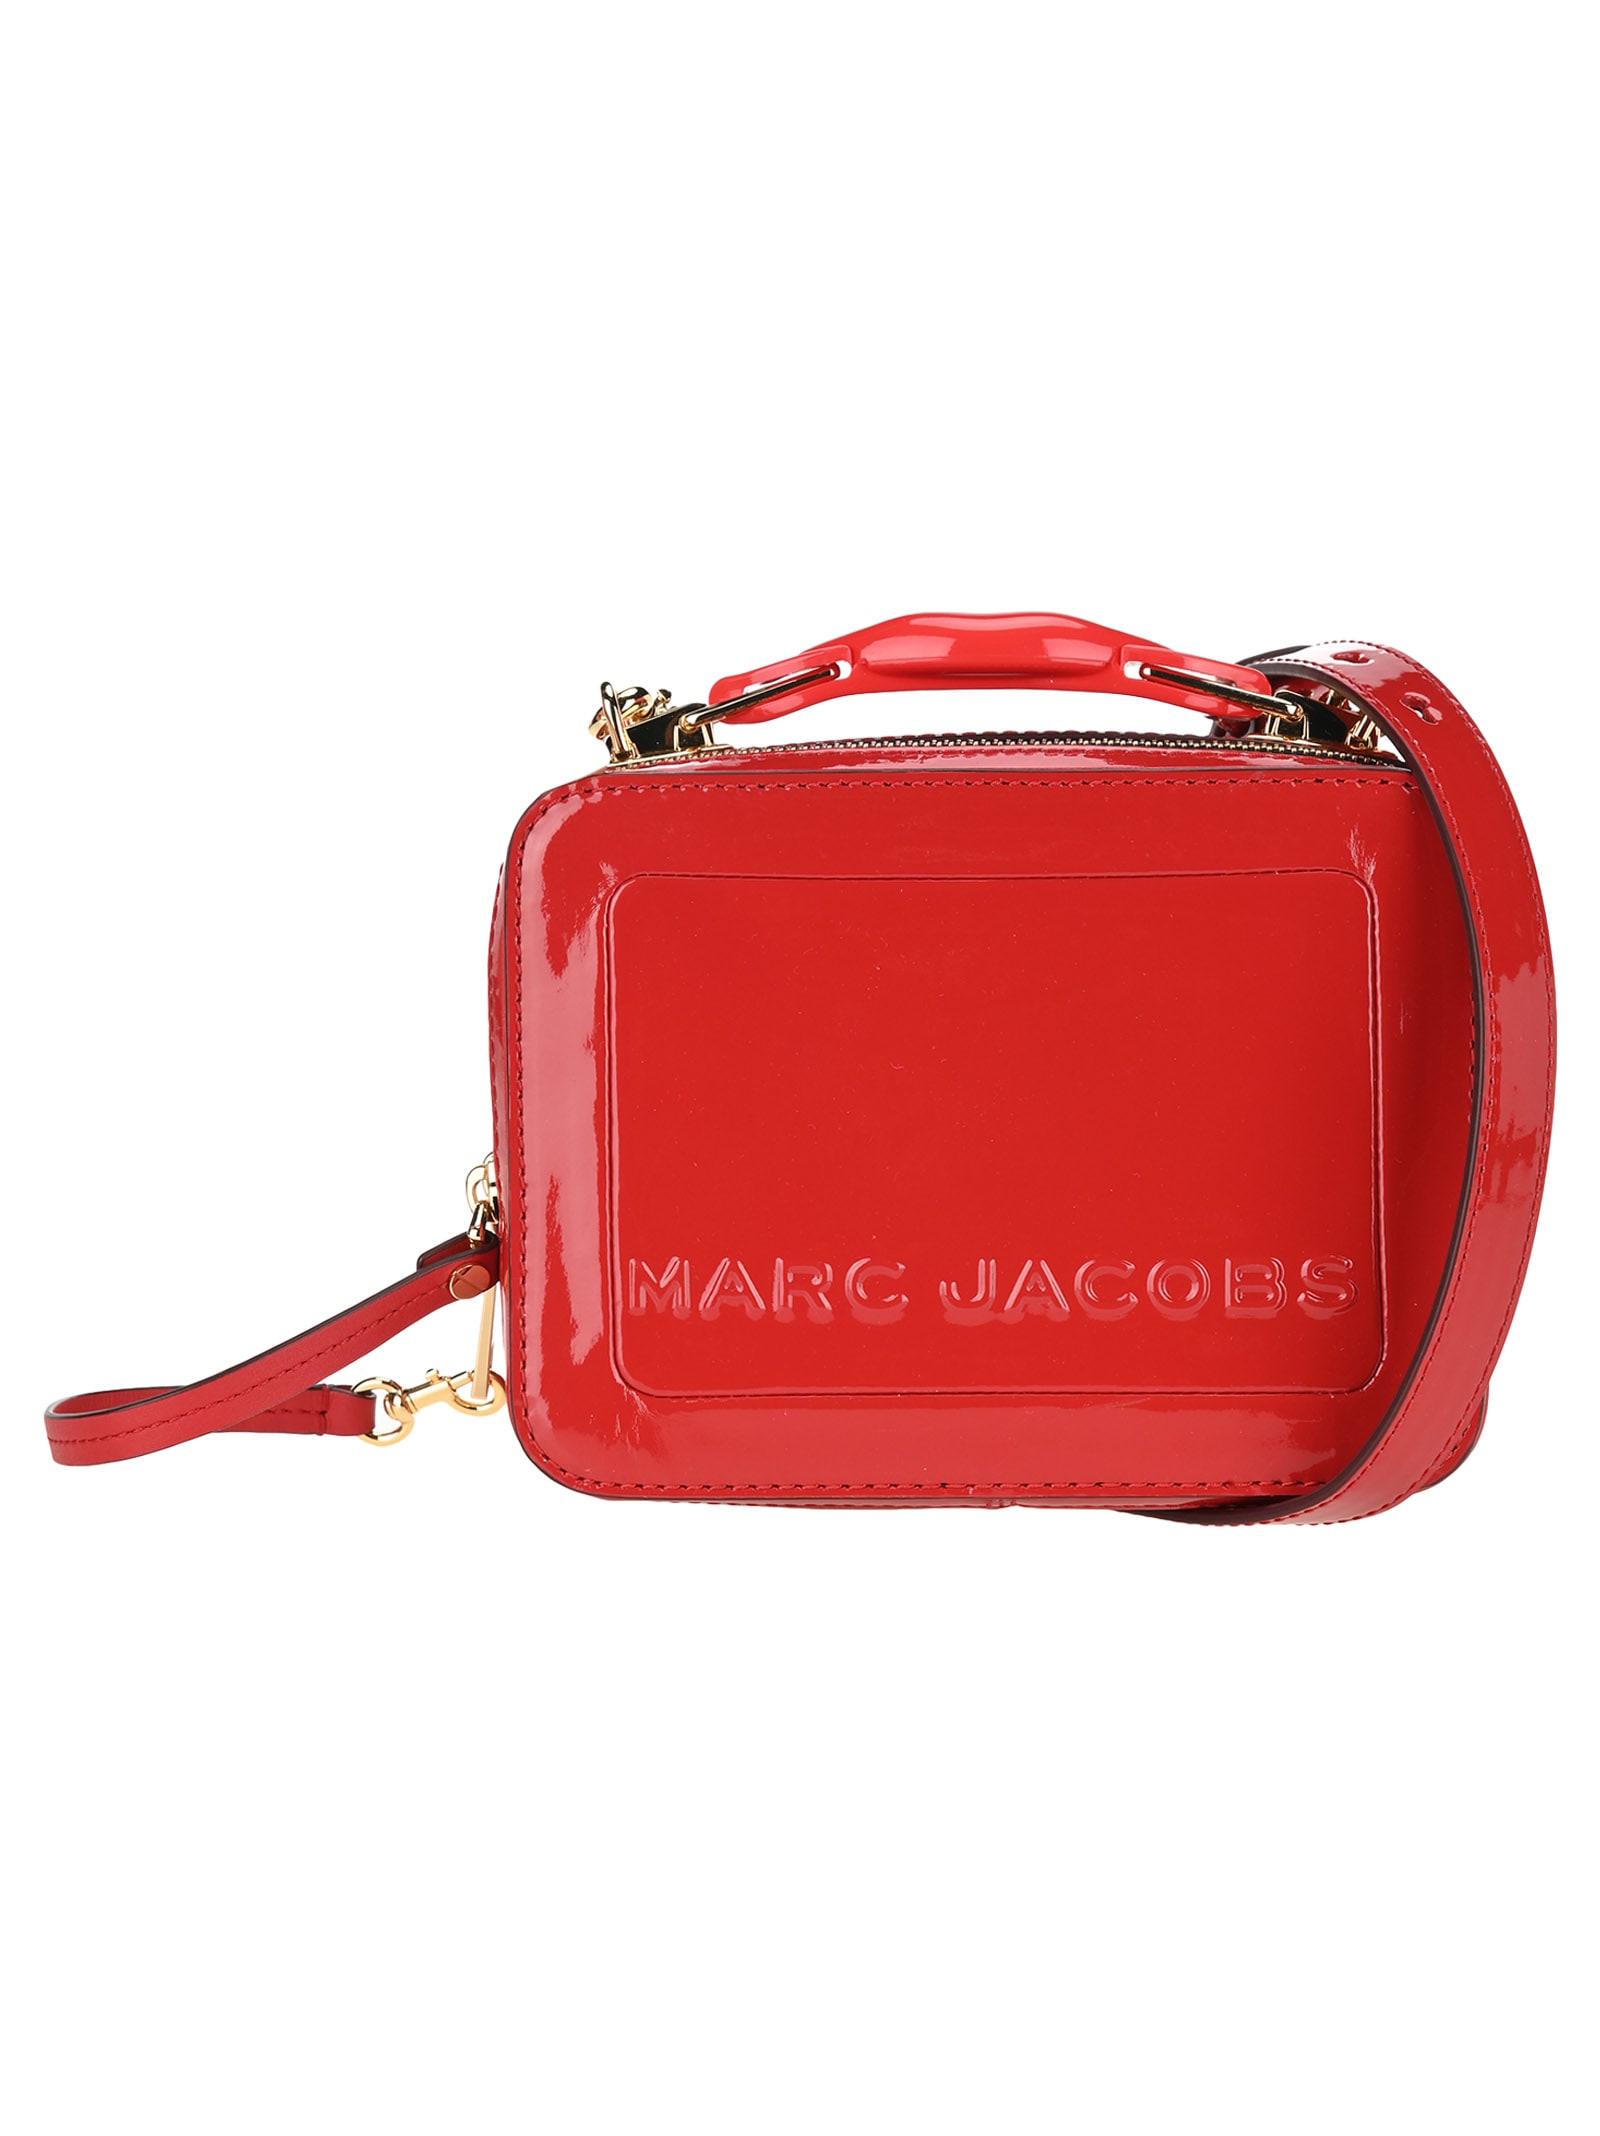 MARC JACOBS THE BOX 20 TOTE BAG,11206611